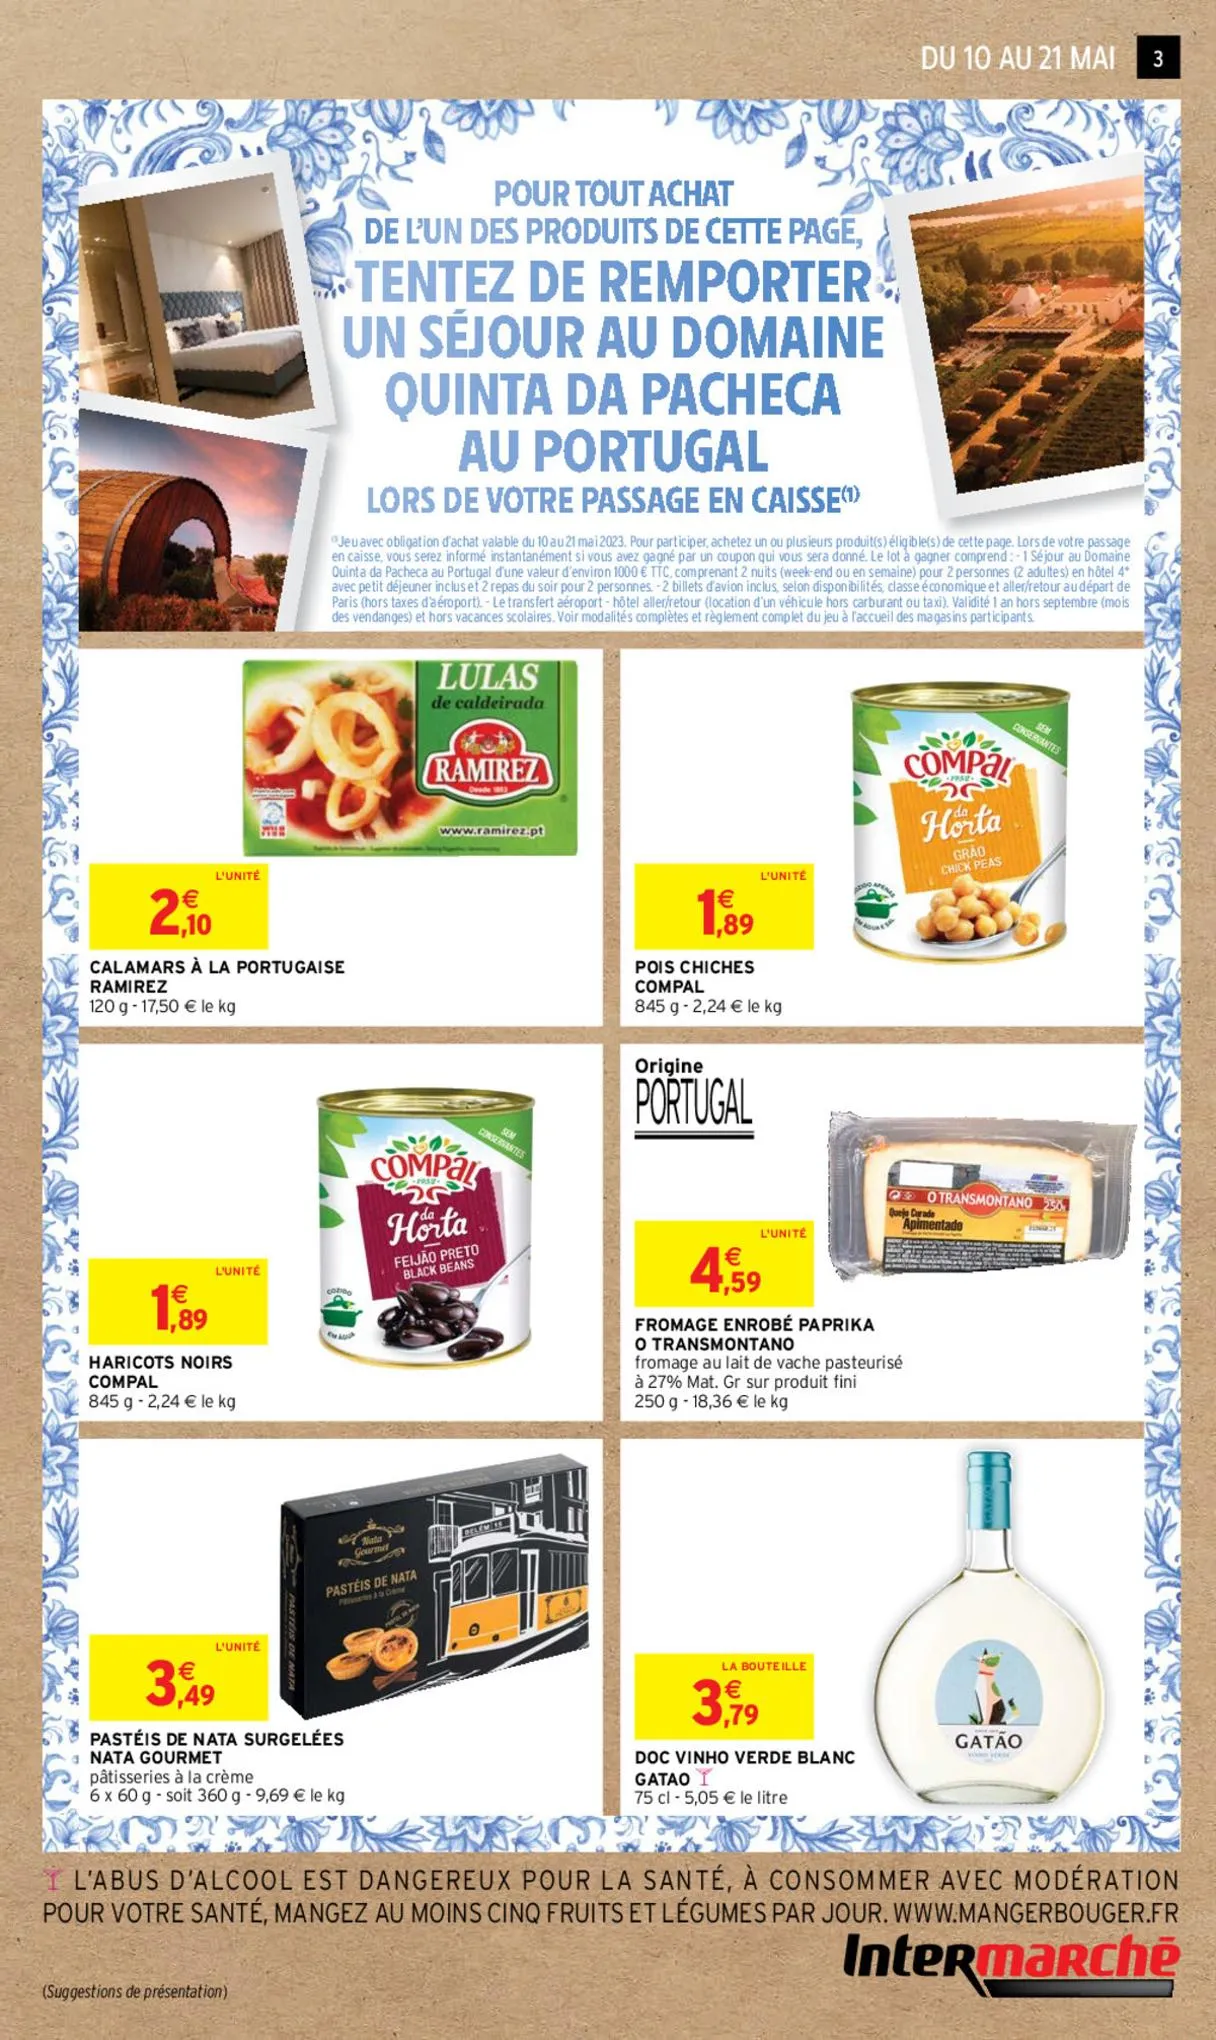 Catalogue S19 - R3 - SPECIAL PORTUGAL, page 00003